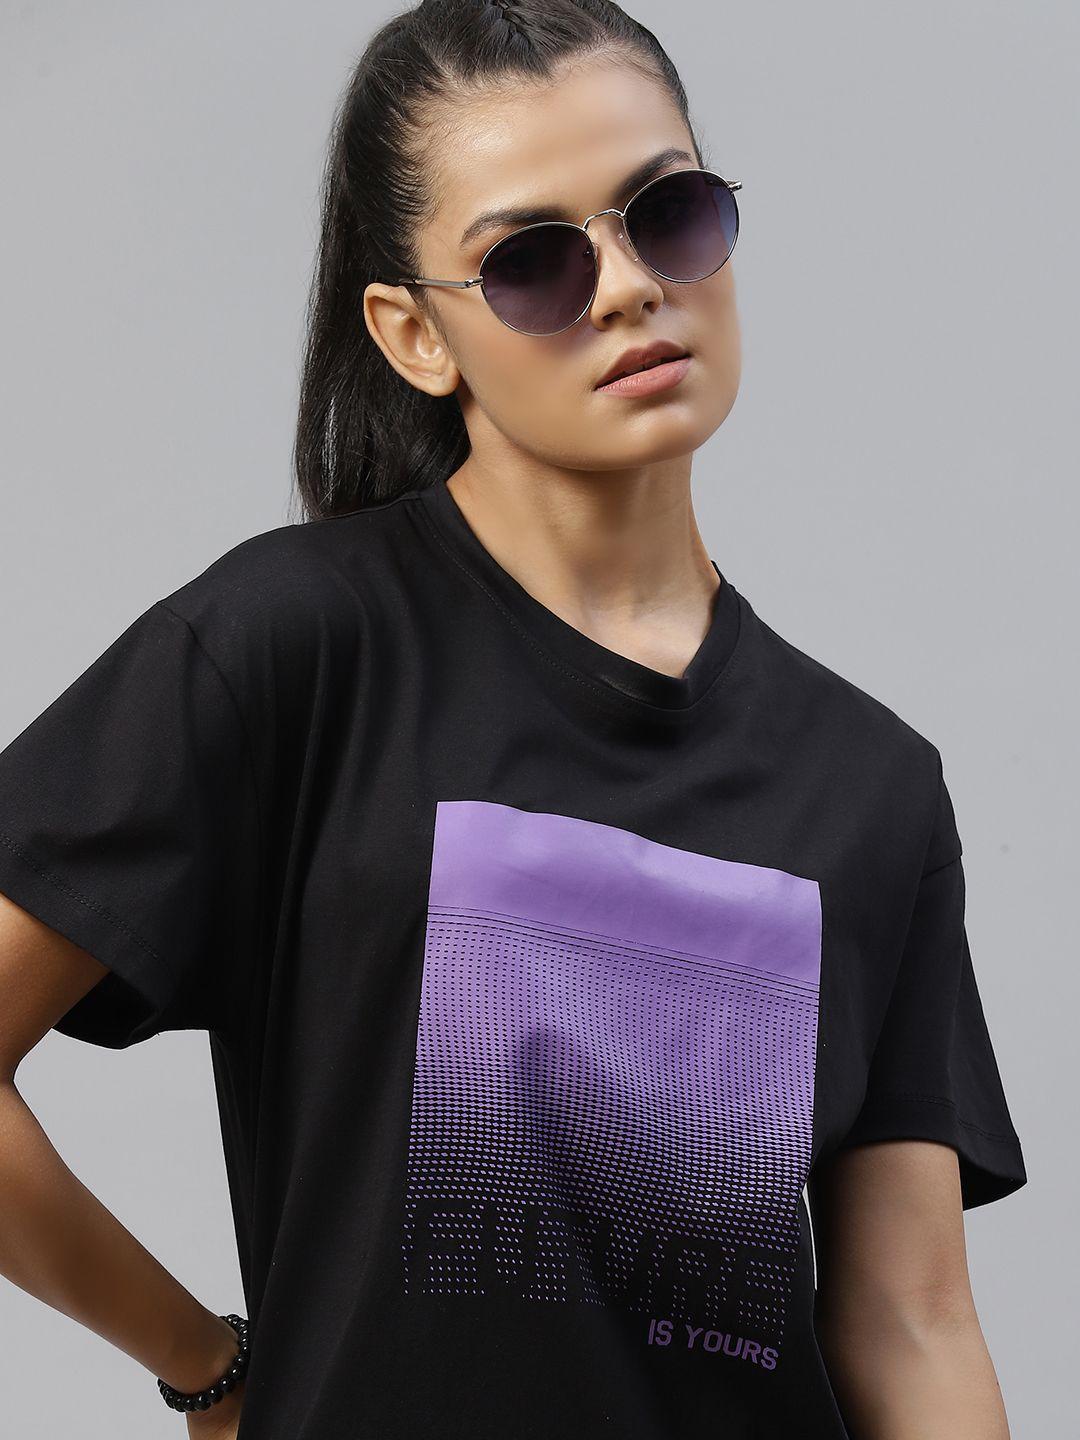 the roadster lifestyle co women black  purple typography printed pure cotton t-shirt